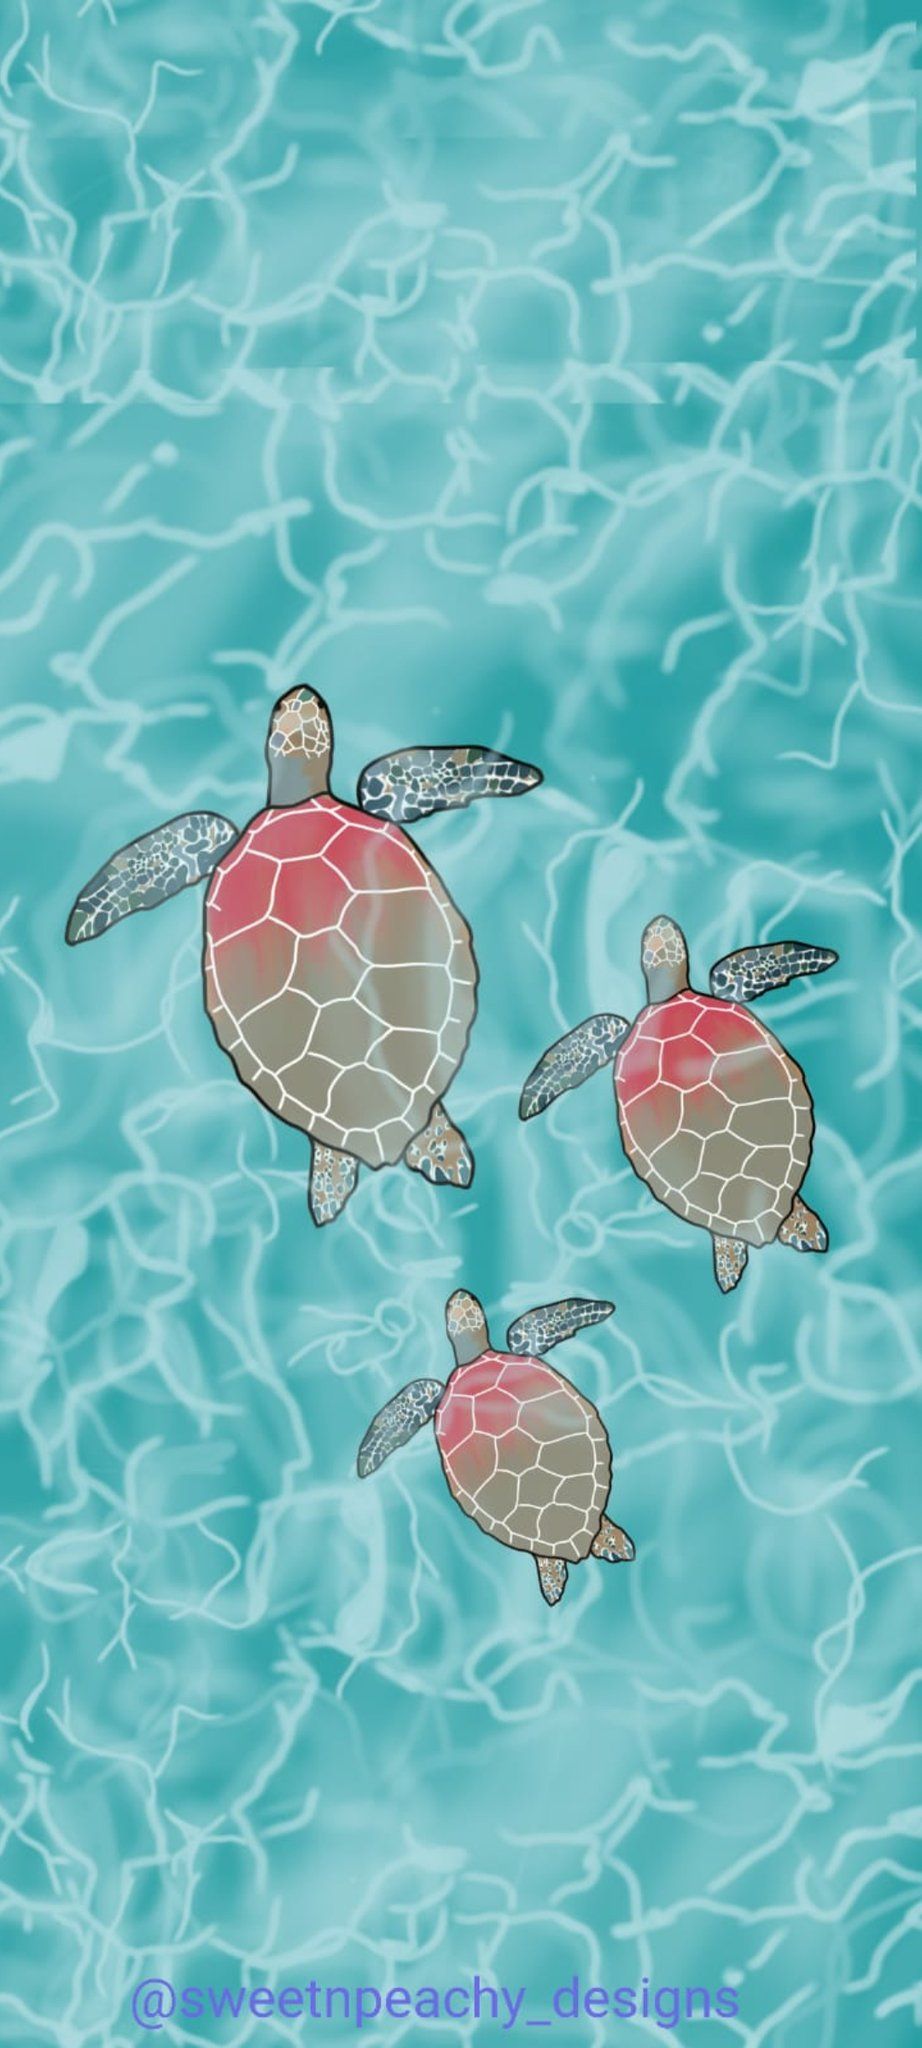 A group of turtles swimming in the ocean - Sea turtle